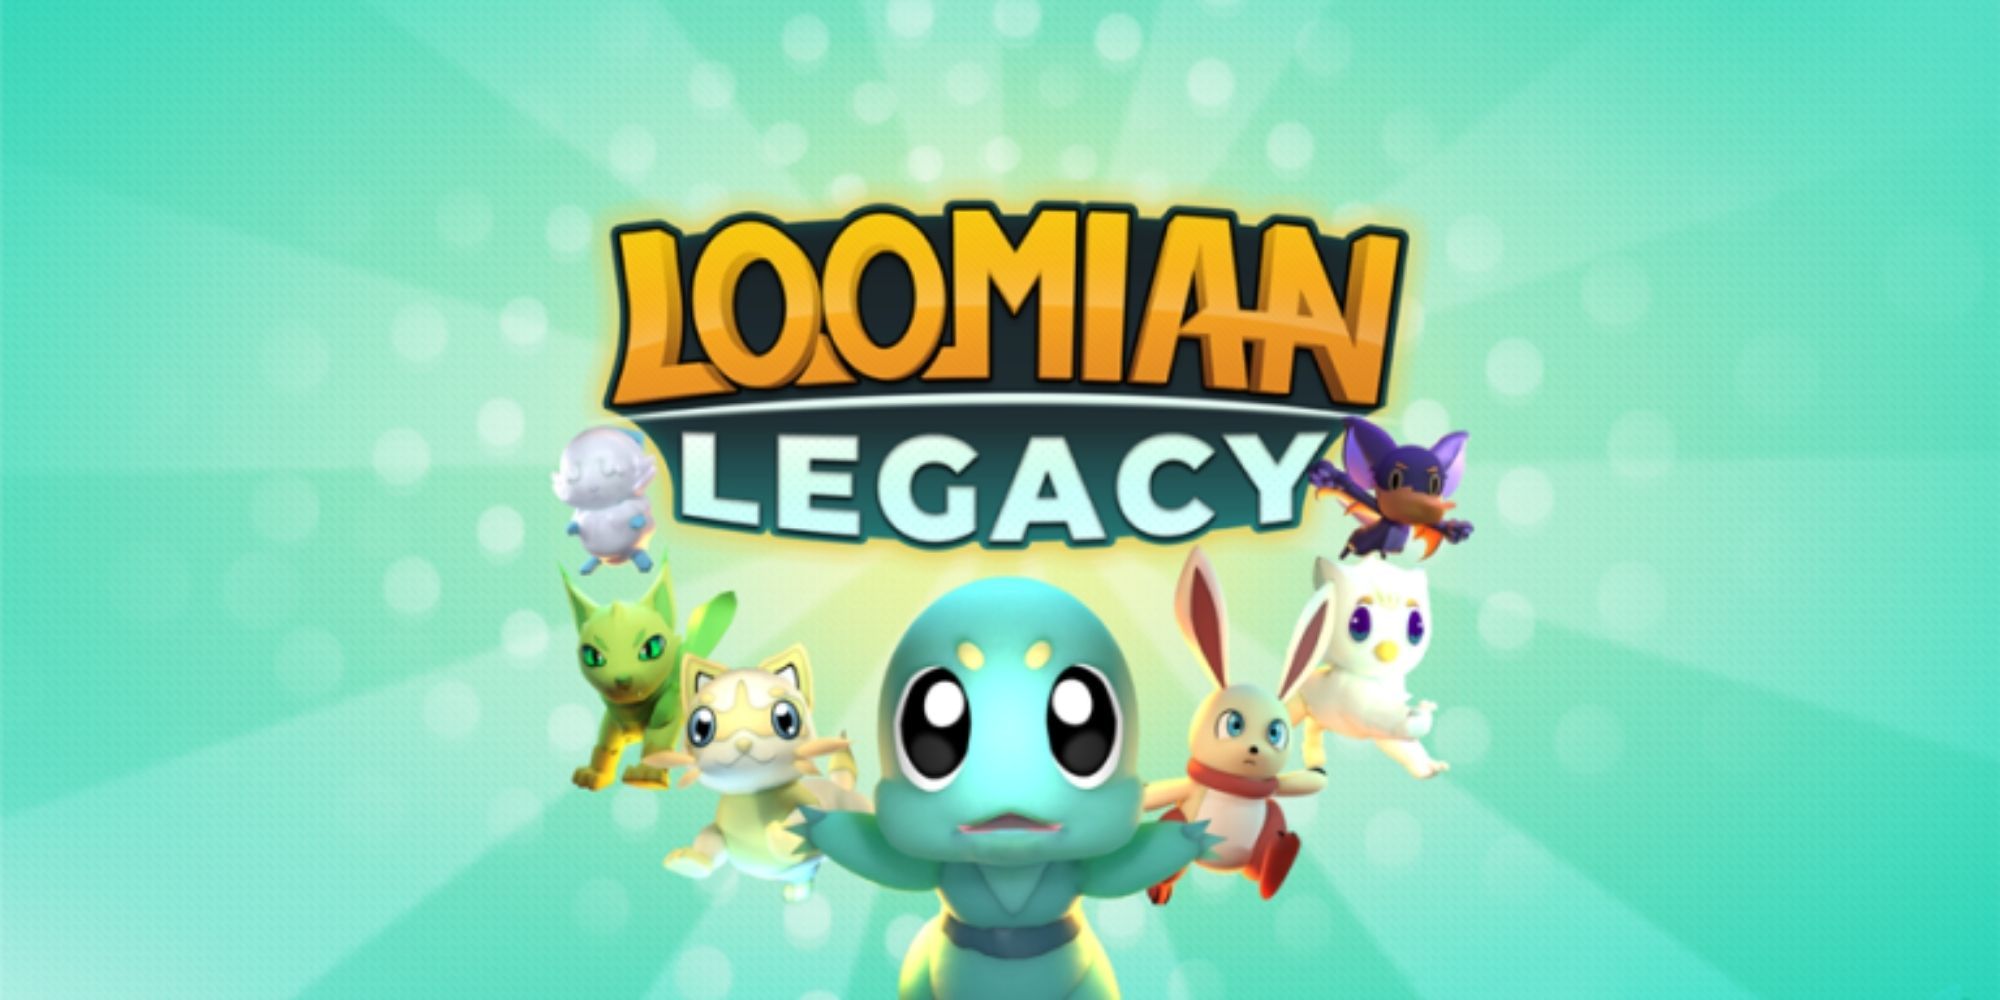 Image still of various Loomians from Roblox game Loomian Legacy.